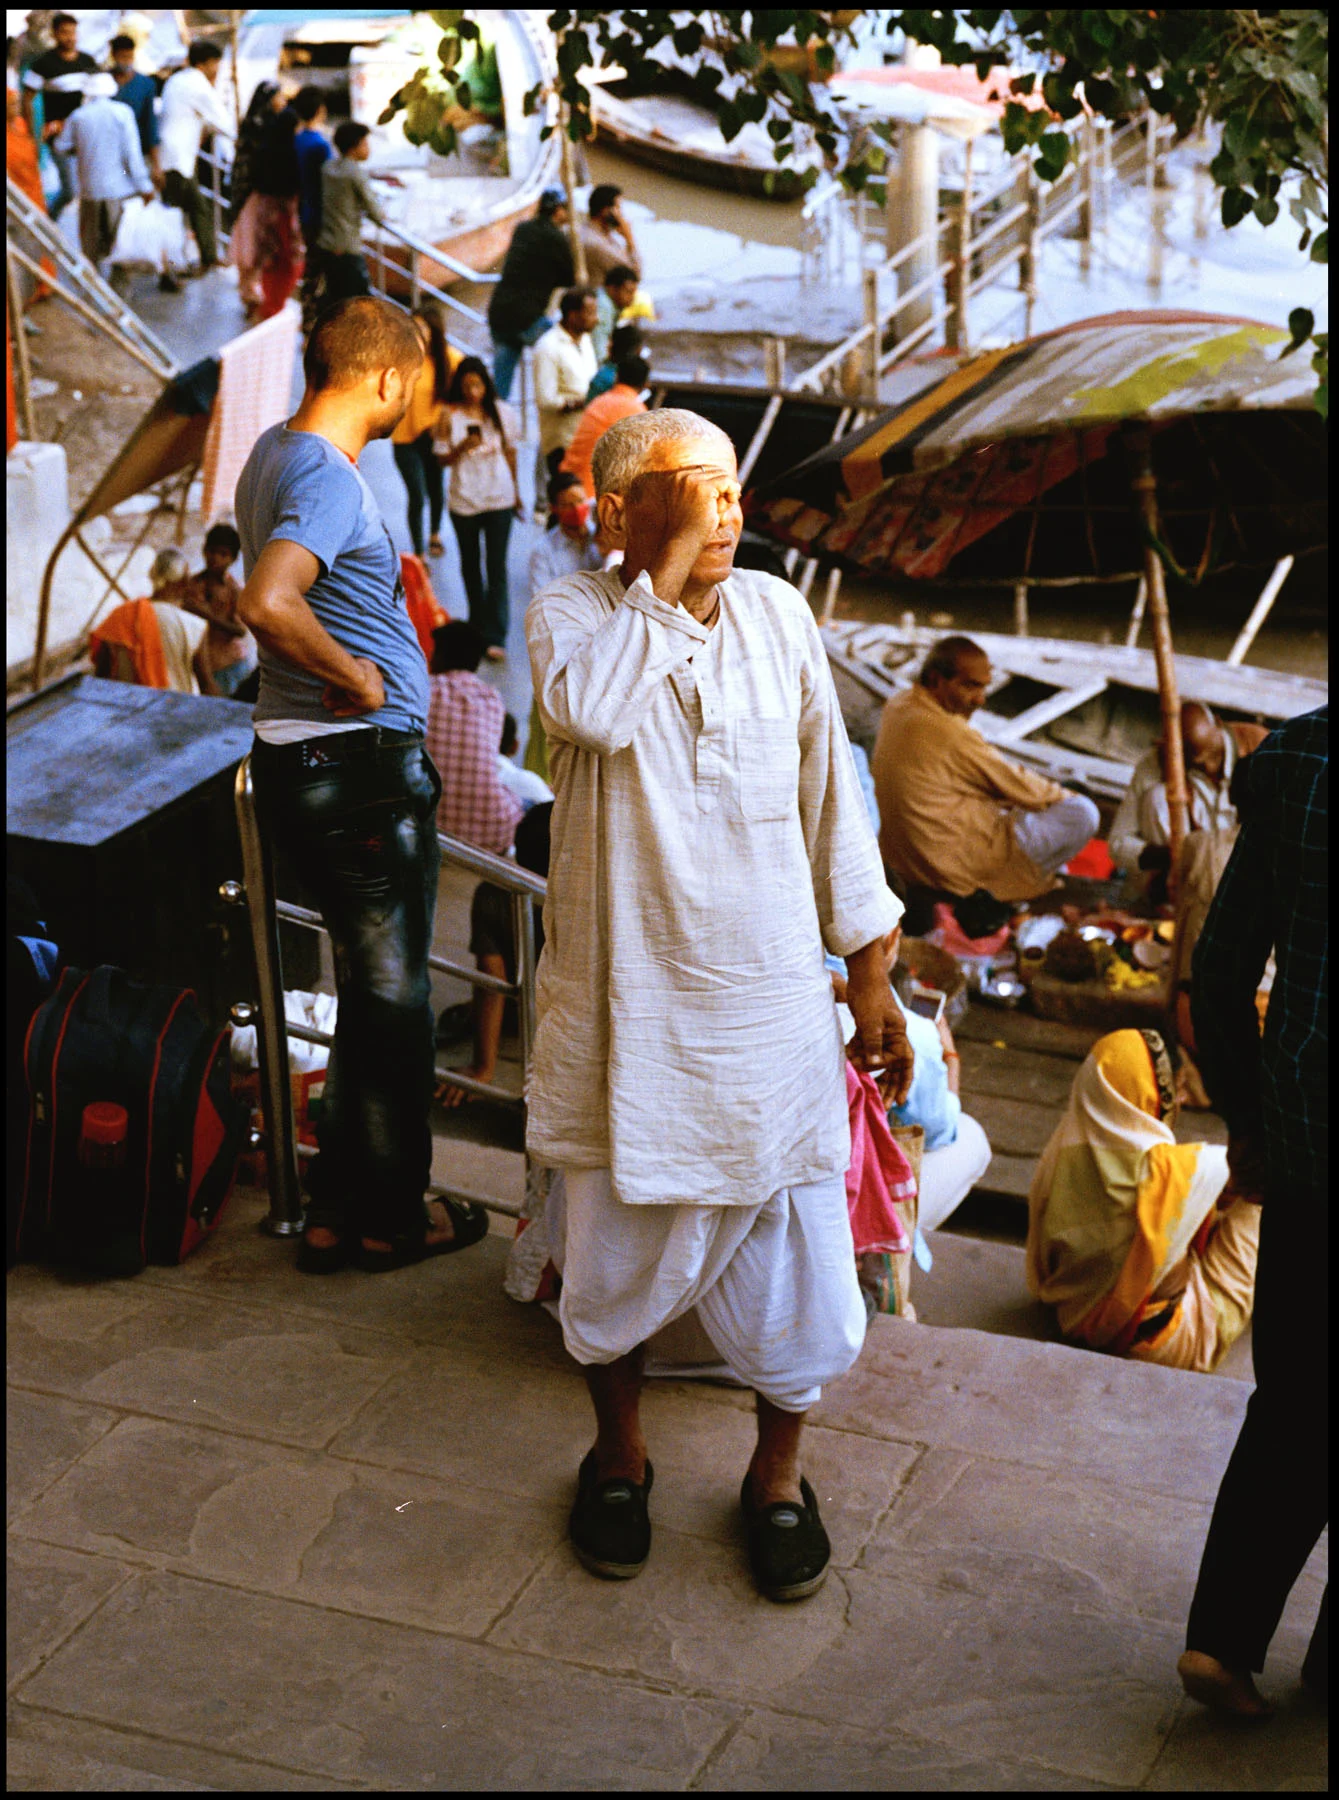 A photograph of an old man wearing white Kurta and Dhoti pants, captured on the steps of the ghat (the series of steps leading down to a body of water or wharf). There are other people at the ghat, in the background of the photograph.